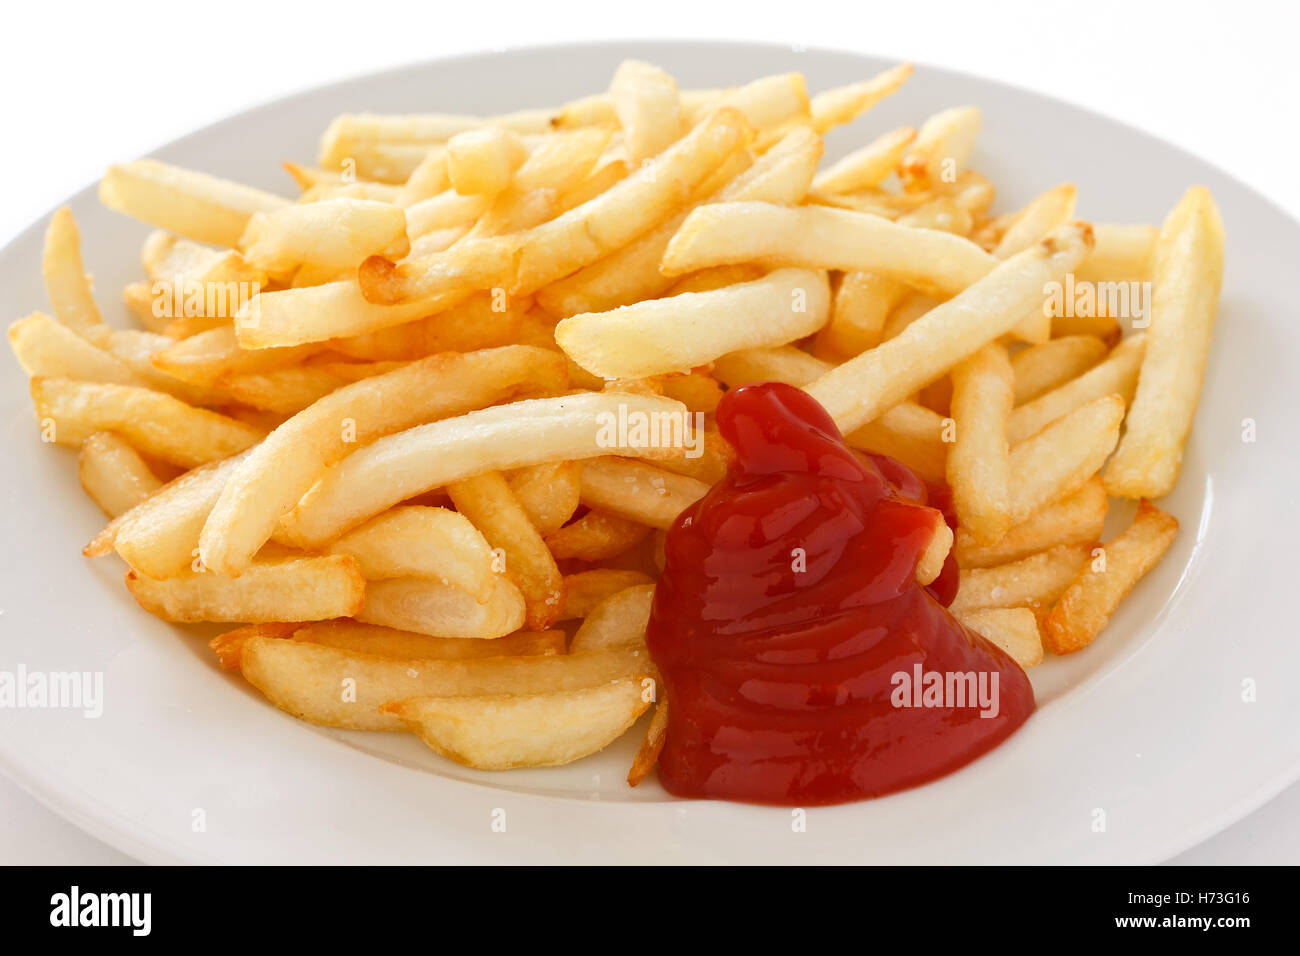 Crispy French fries with ketchup ready to eat Stock Photo